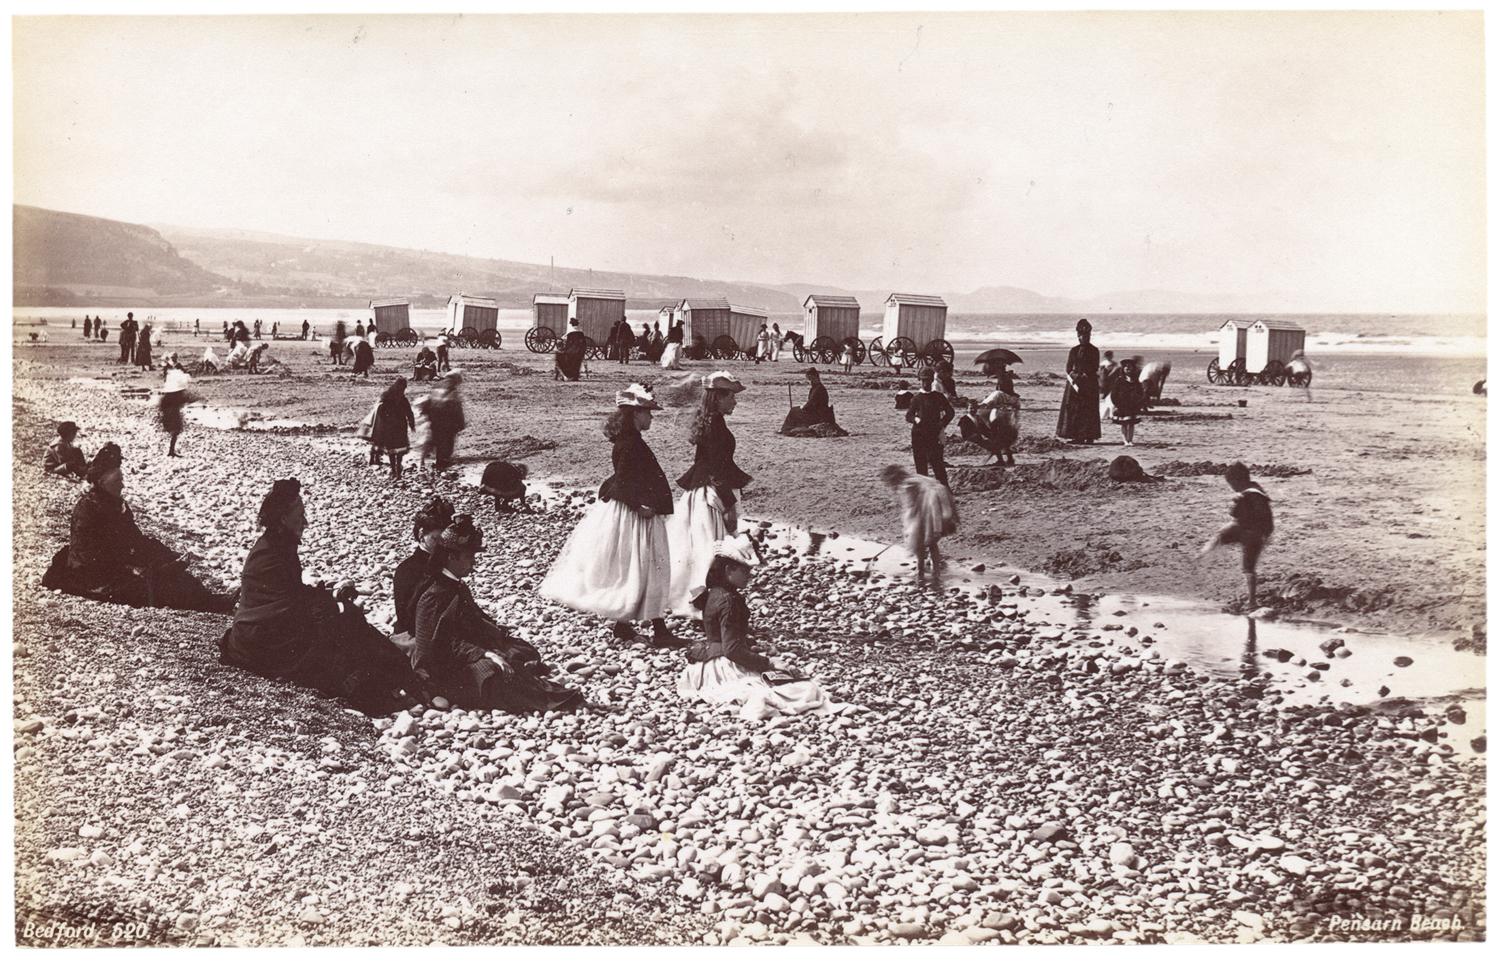 Groups of people gathered on a long stretch of rocky beach. Photograph by Francis Bedford.